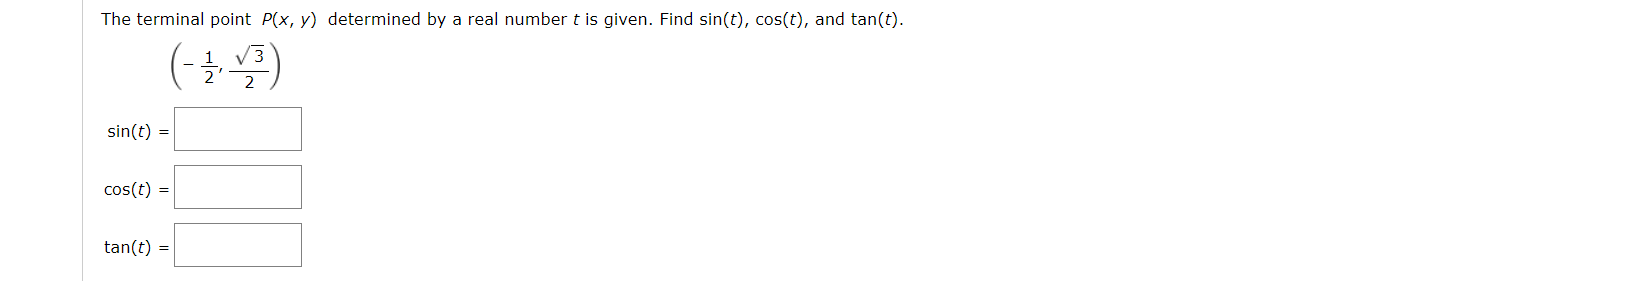 The terminal point P(x, y) determined by a real number t is given. Find sin(t), cos(t), and tan(t).
sin(t)
cos(t)
tan(t)
